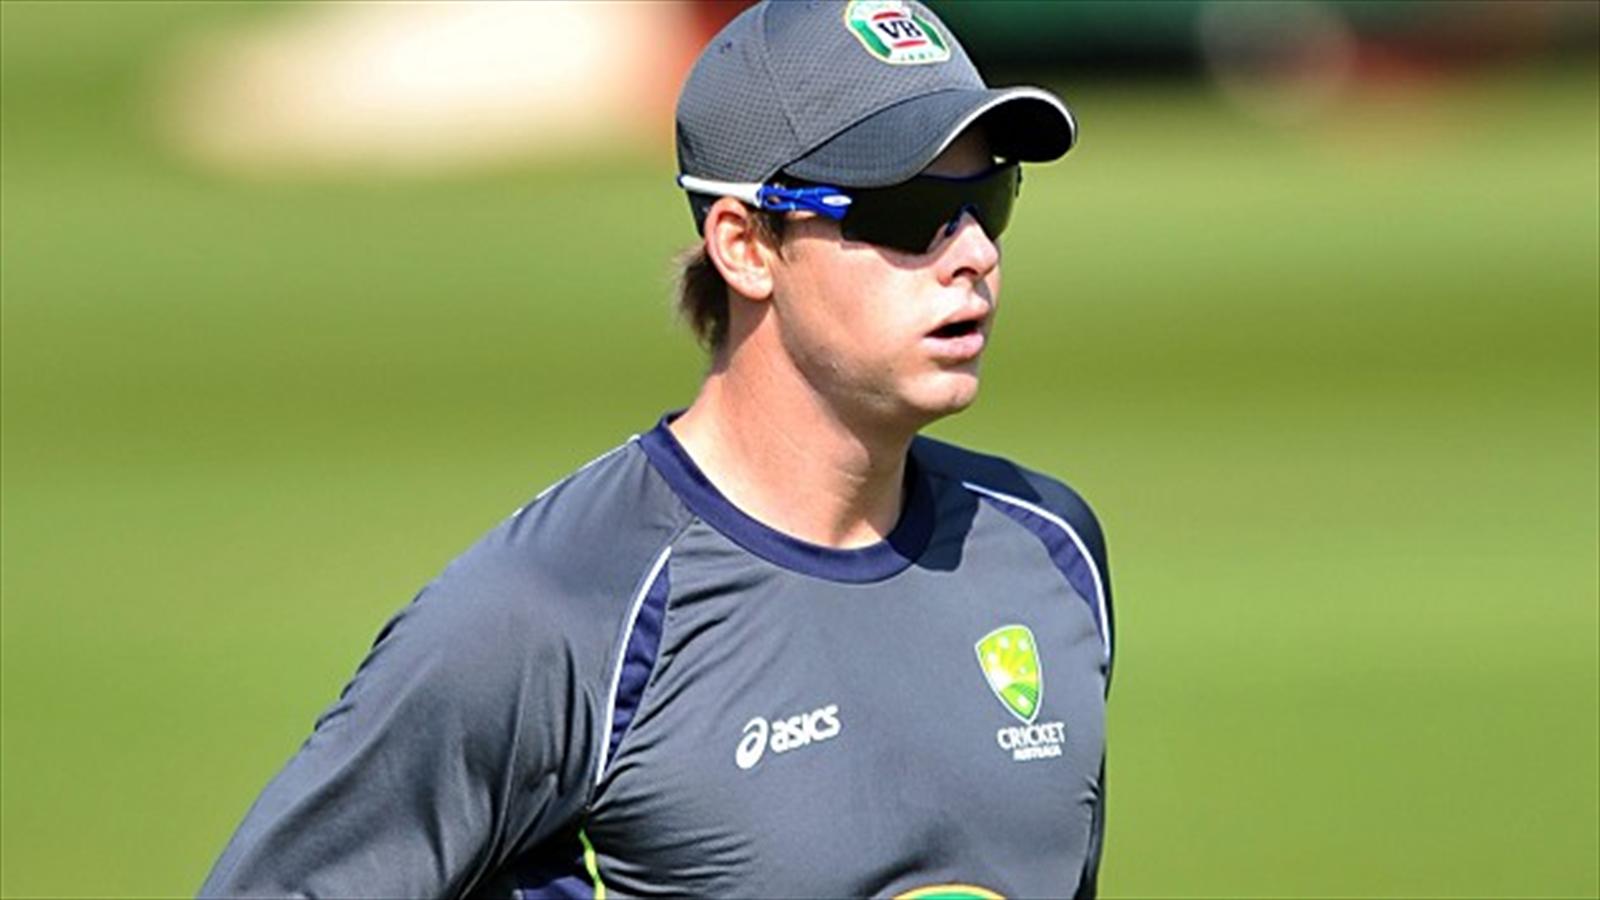 Smart Steven Smith HD Wallpaper And New Image